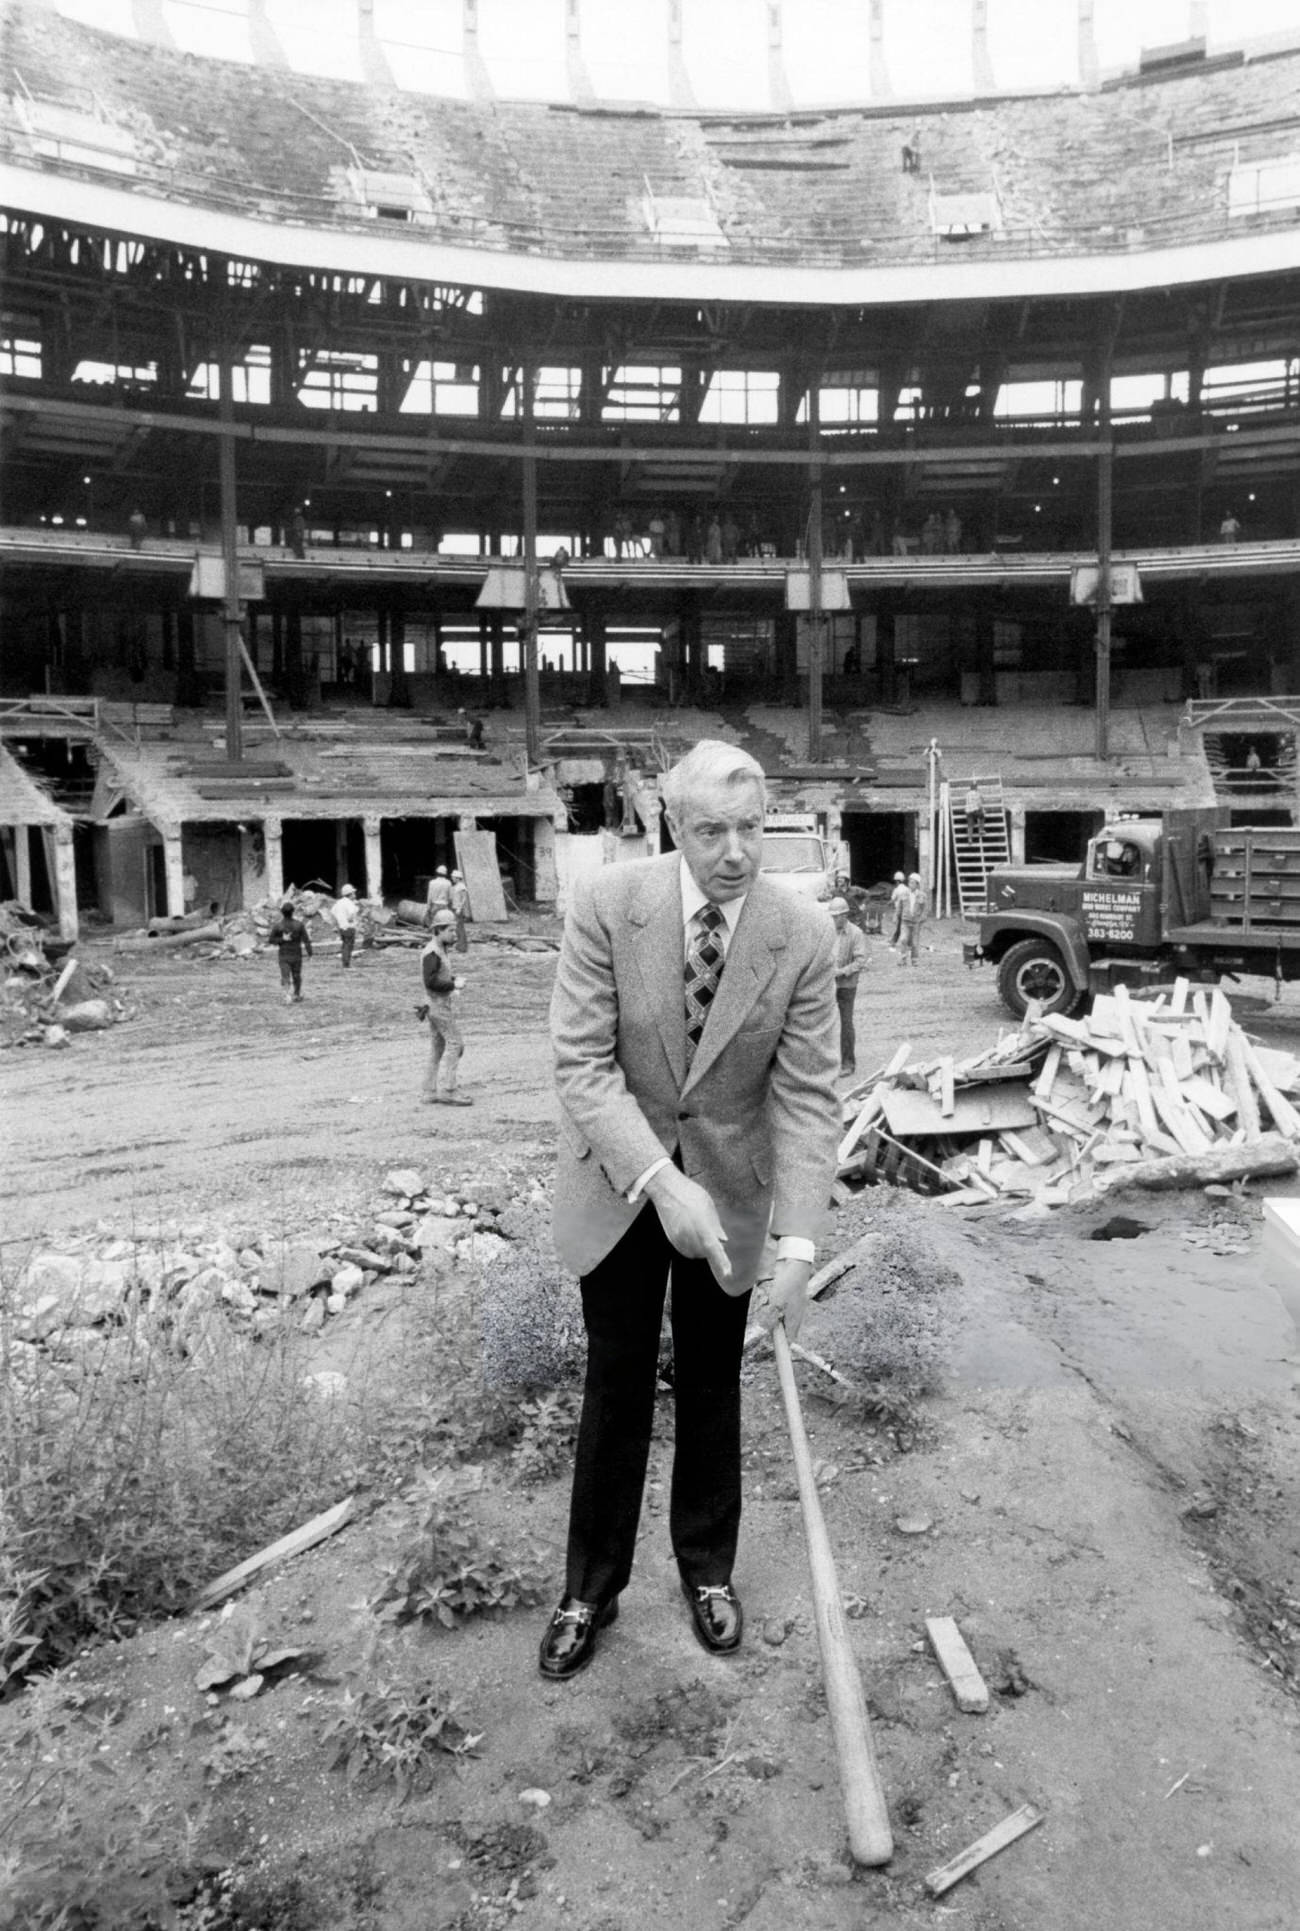 Joe Dimaggio Stands Where Home Plate Once Was At Yankee Stadium During Renovations, 1974.